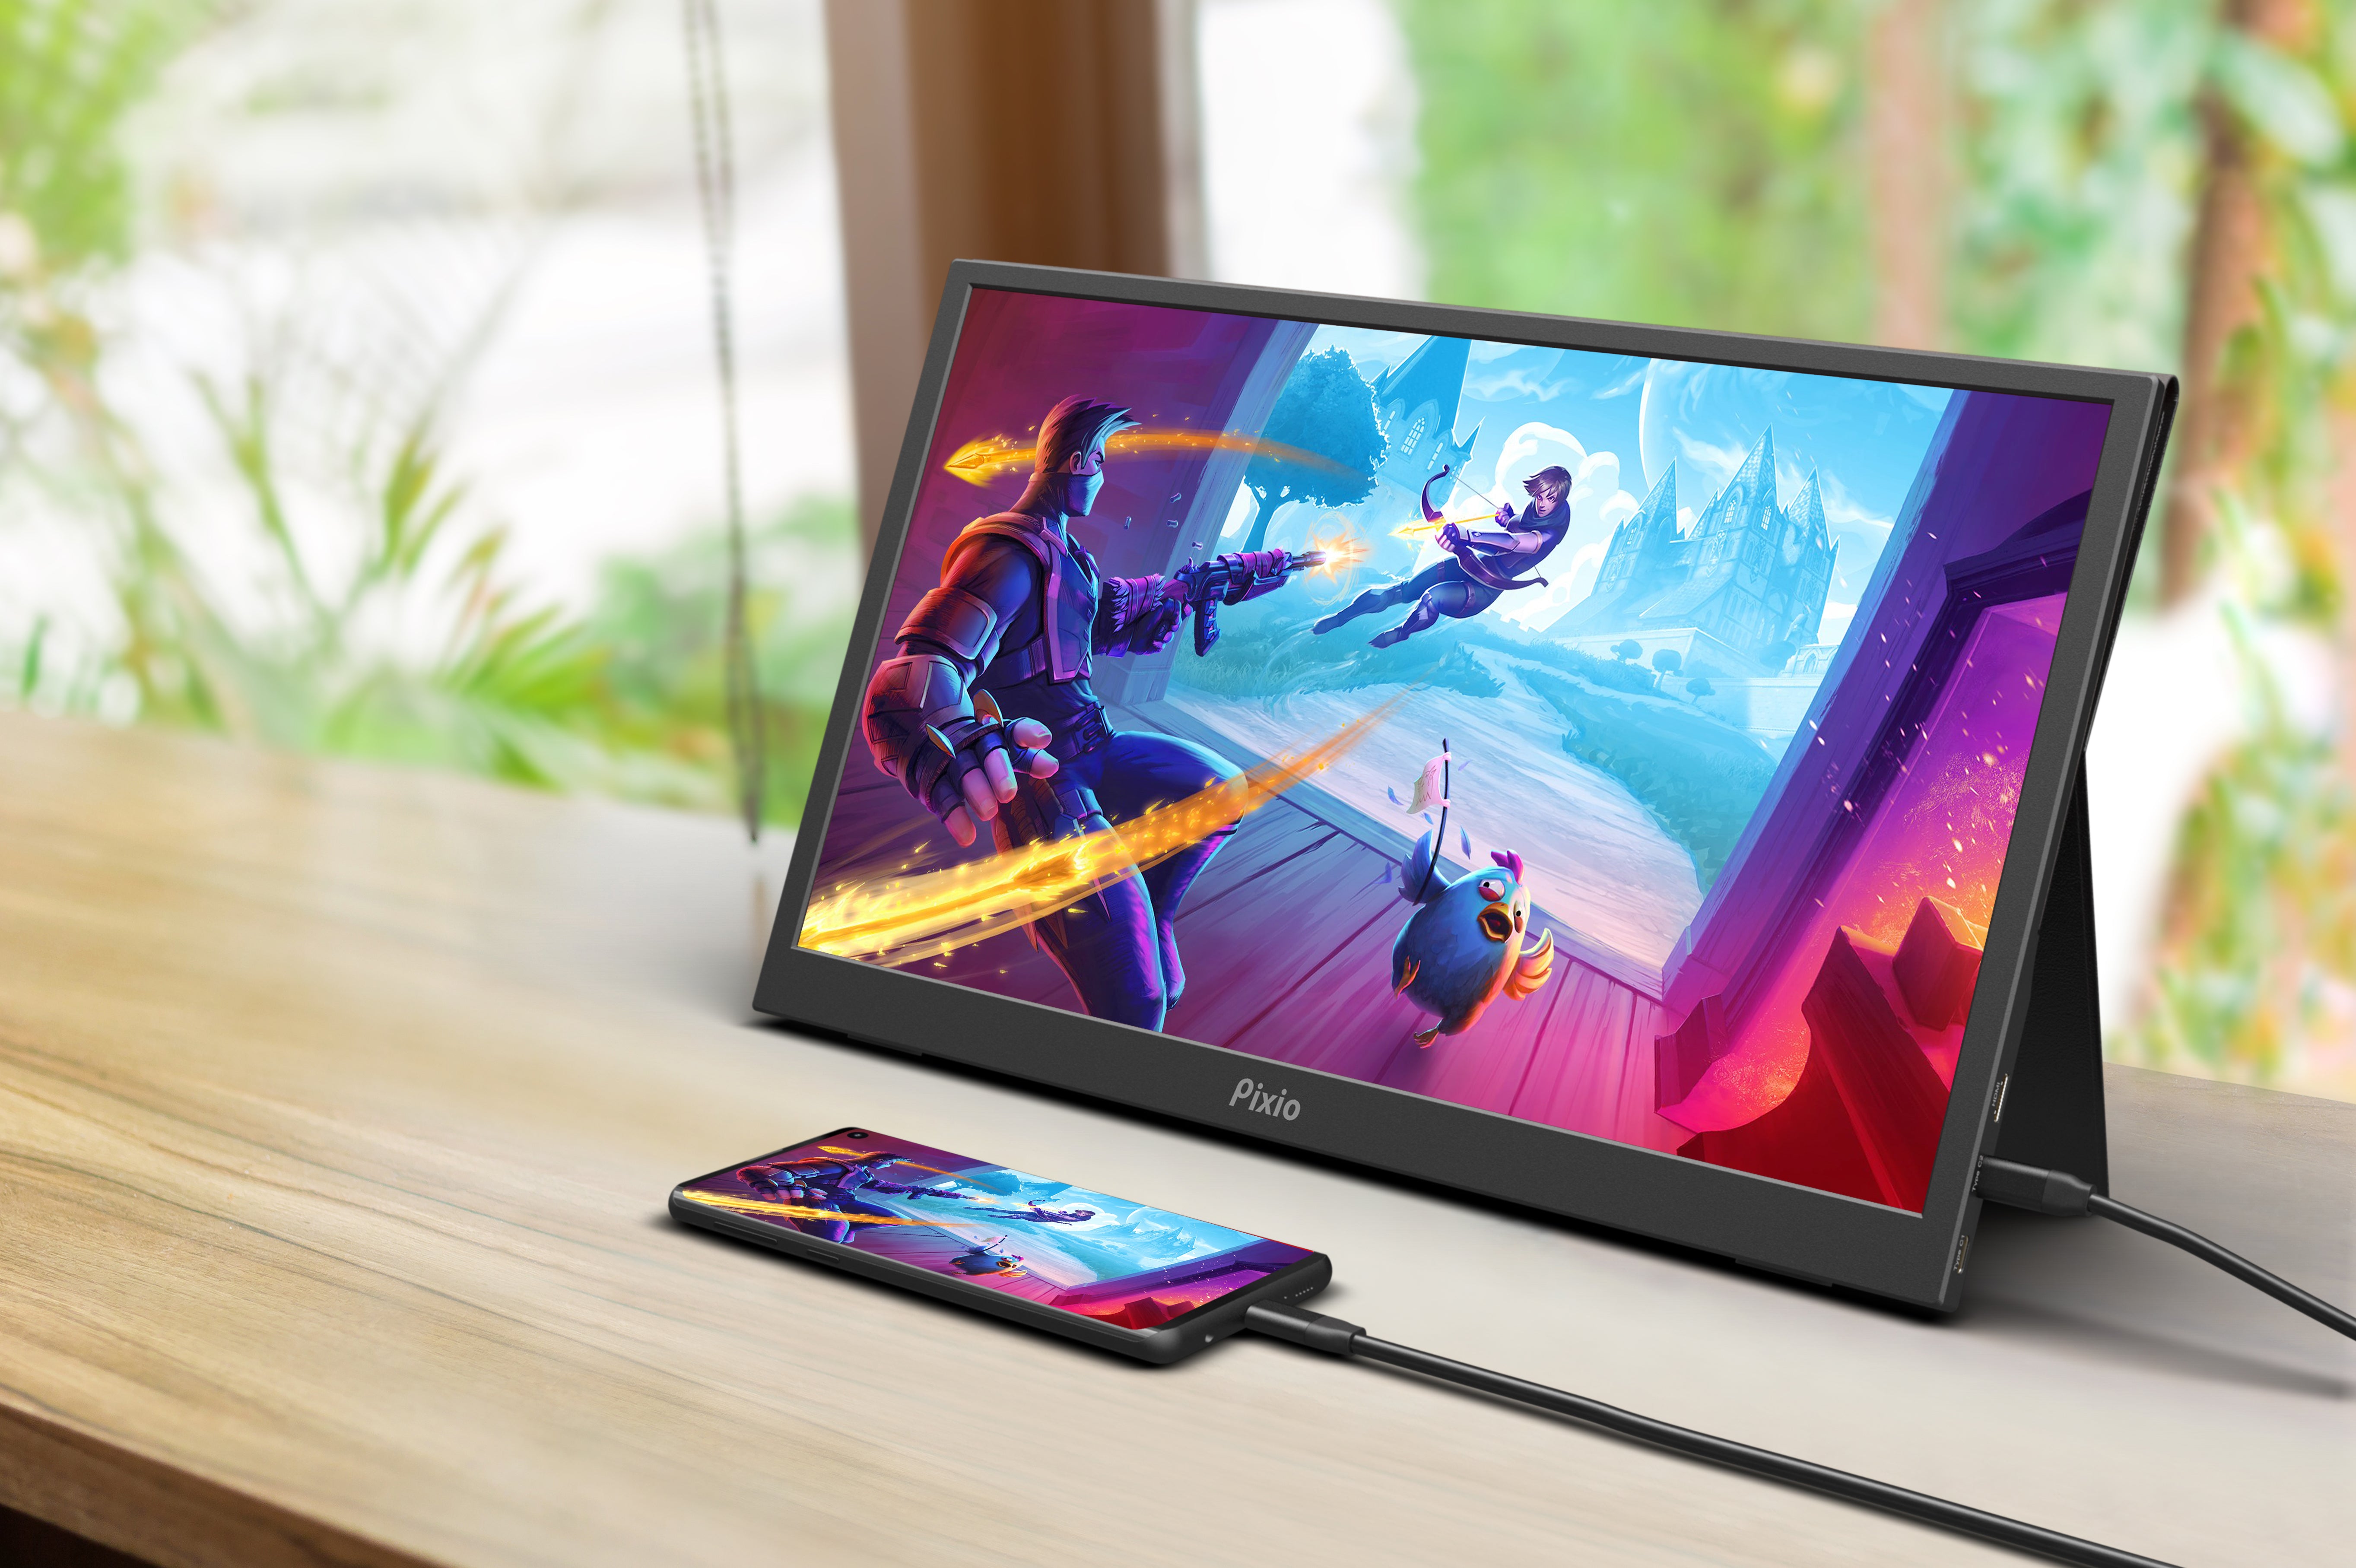 Pixio PX160 | 15.6 inch 1080p 60Hz IPS HDR Portable Gaming Monitor